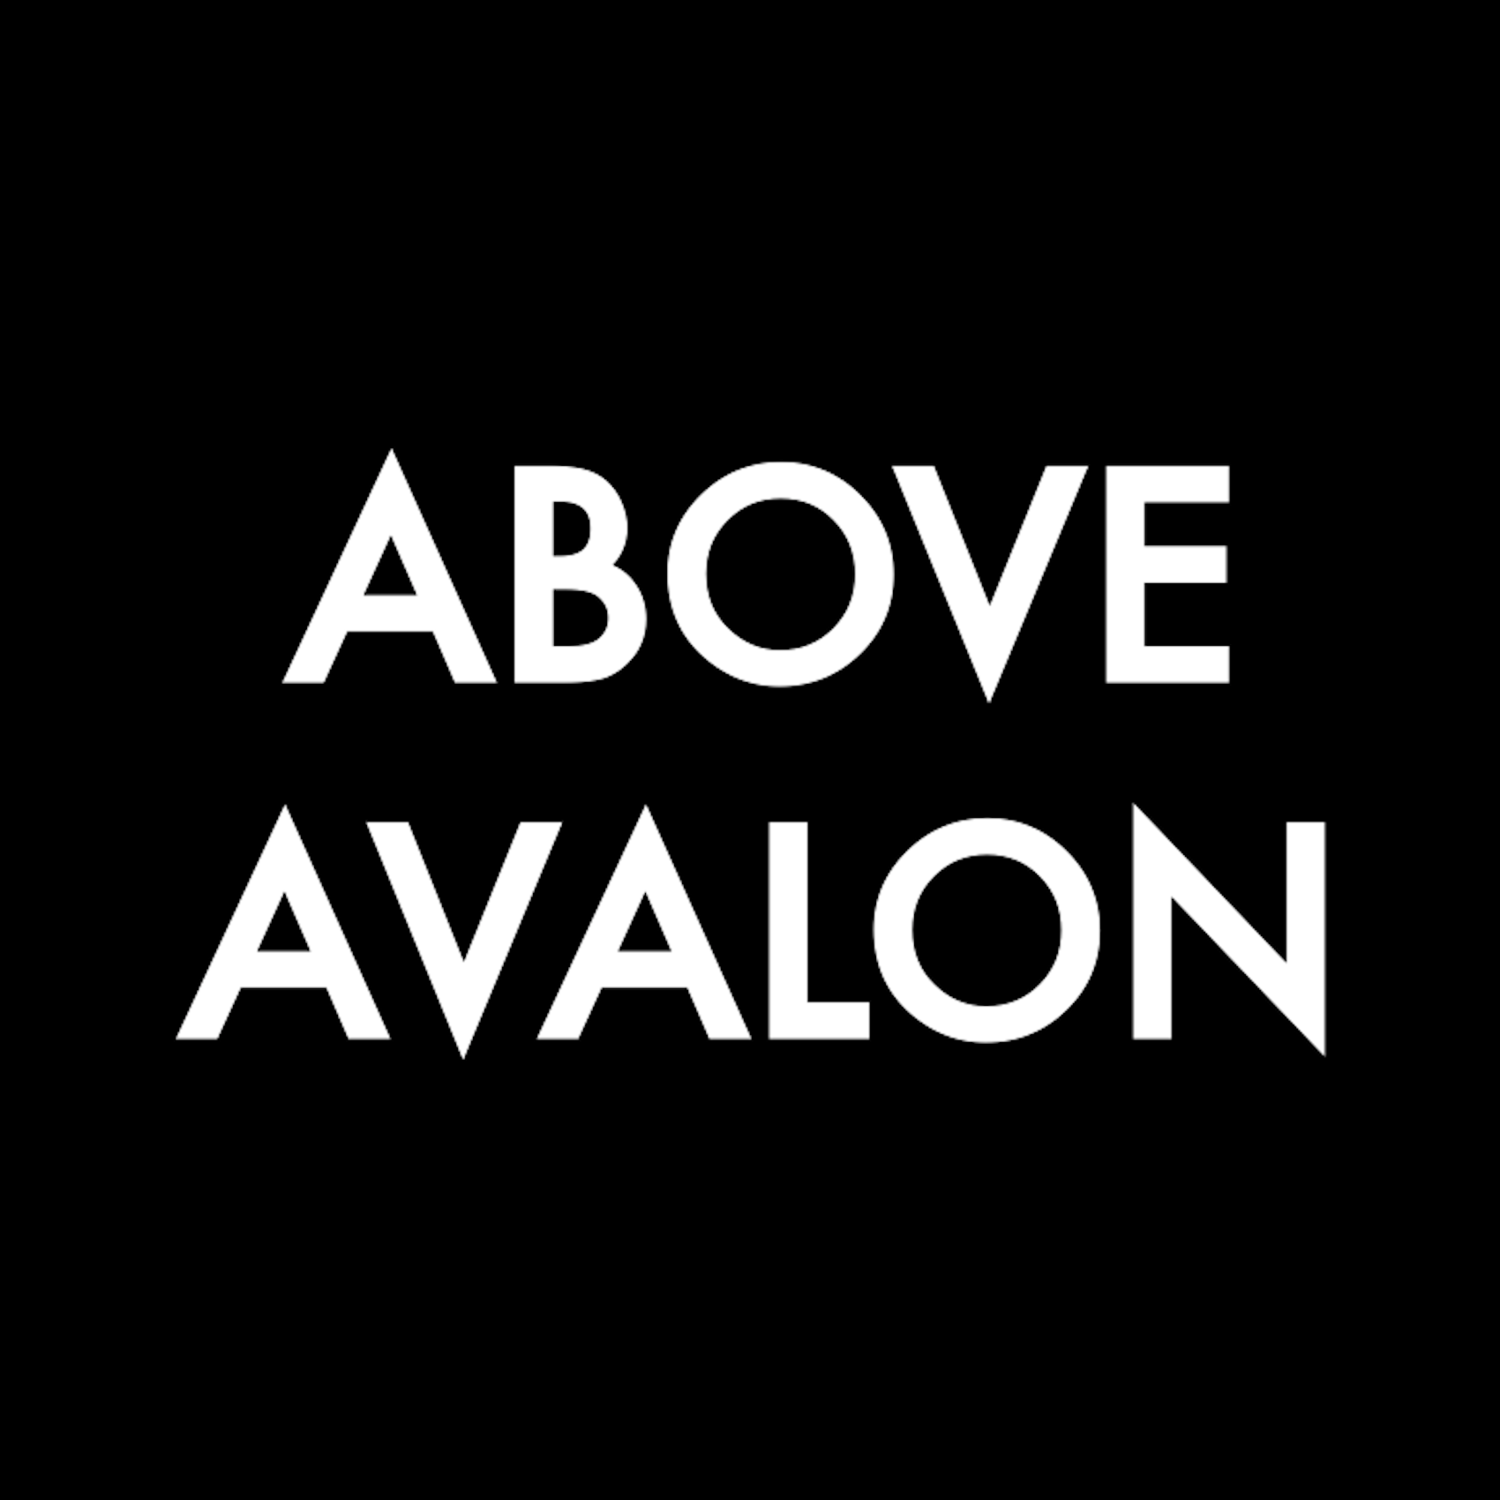 Above Avalon Episode 189: Apple Is in a League of Its Own